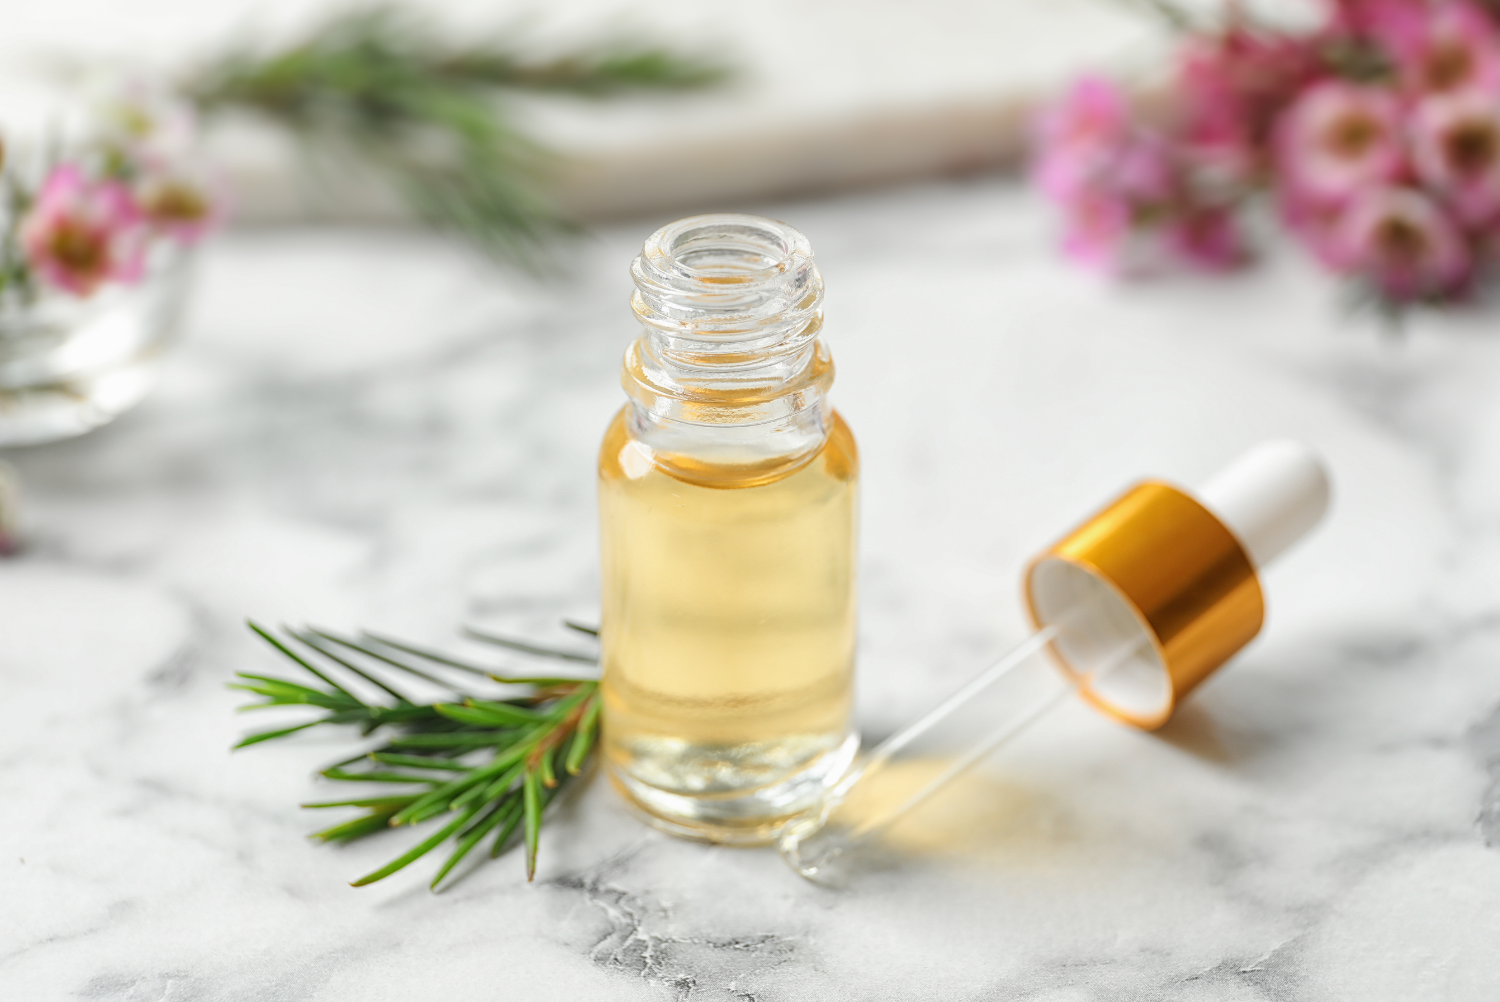 10 Science-Backed Uses for Tea Tree Oil